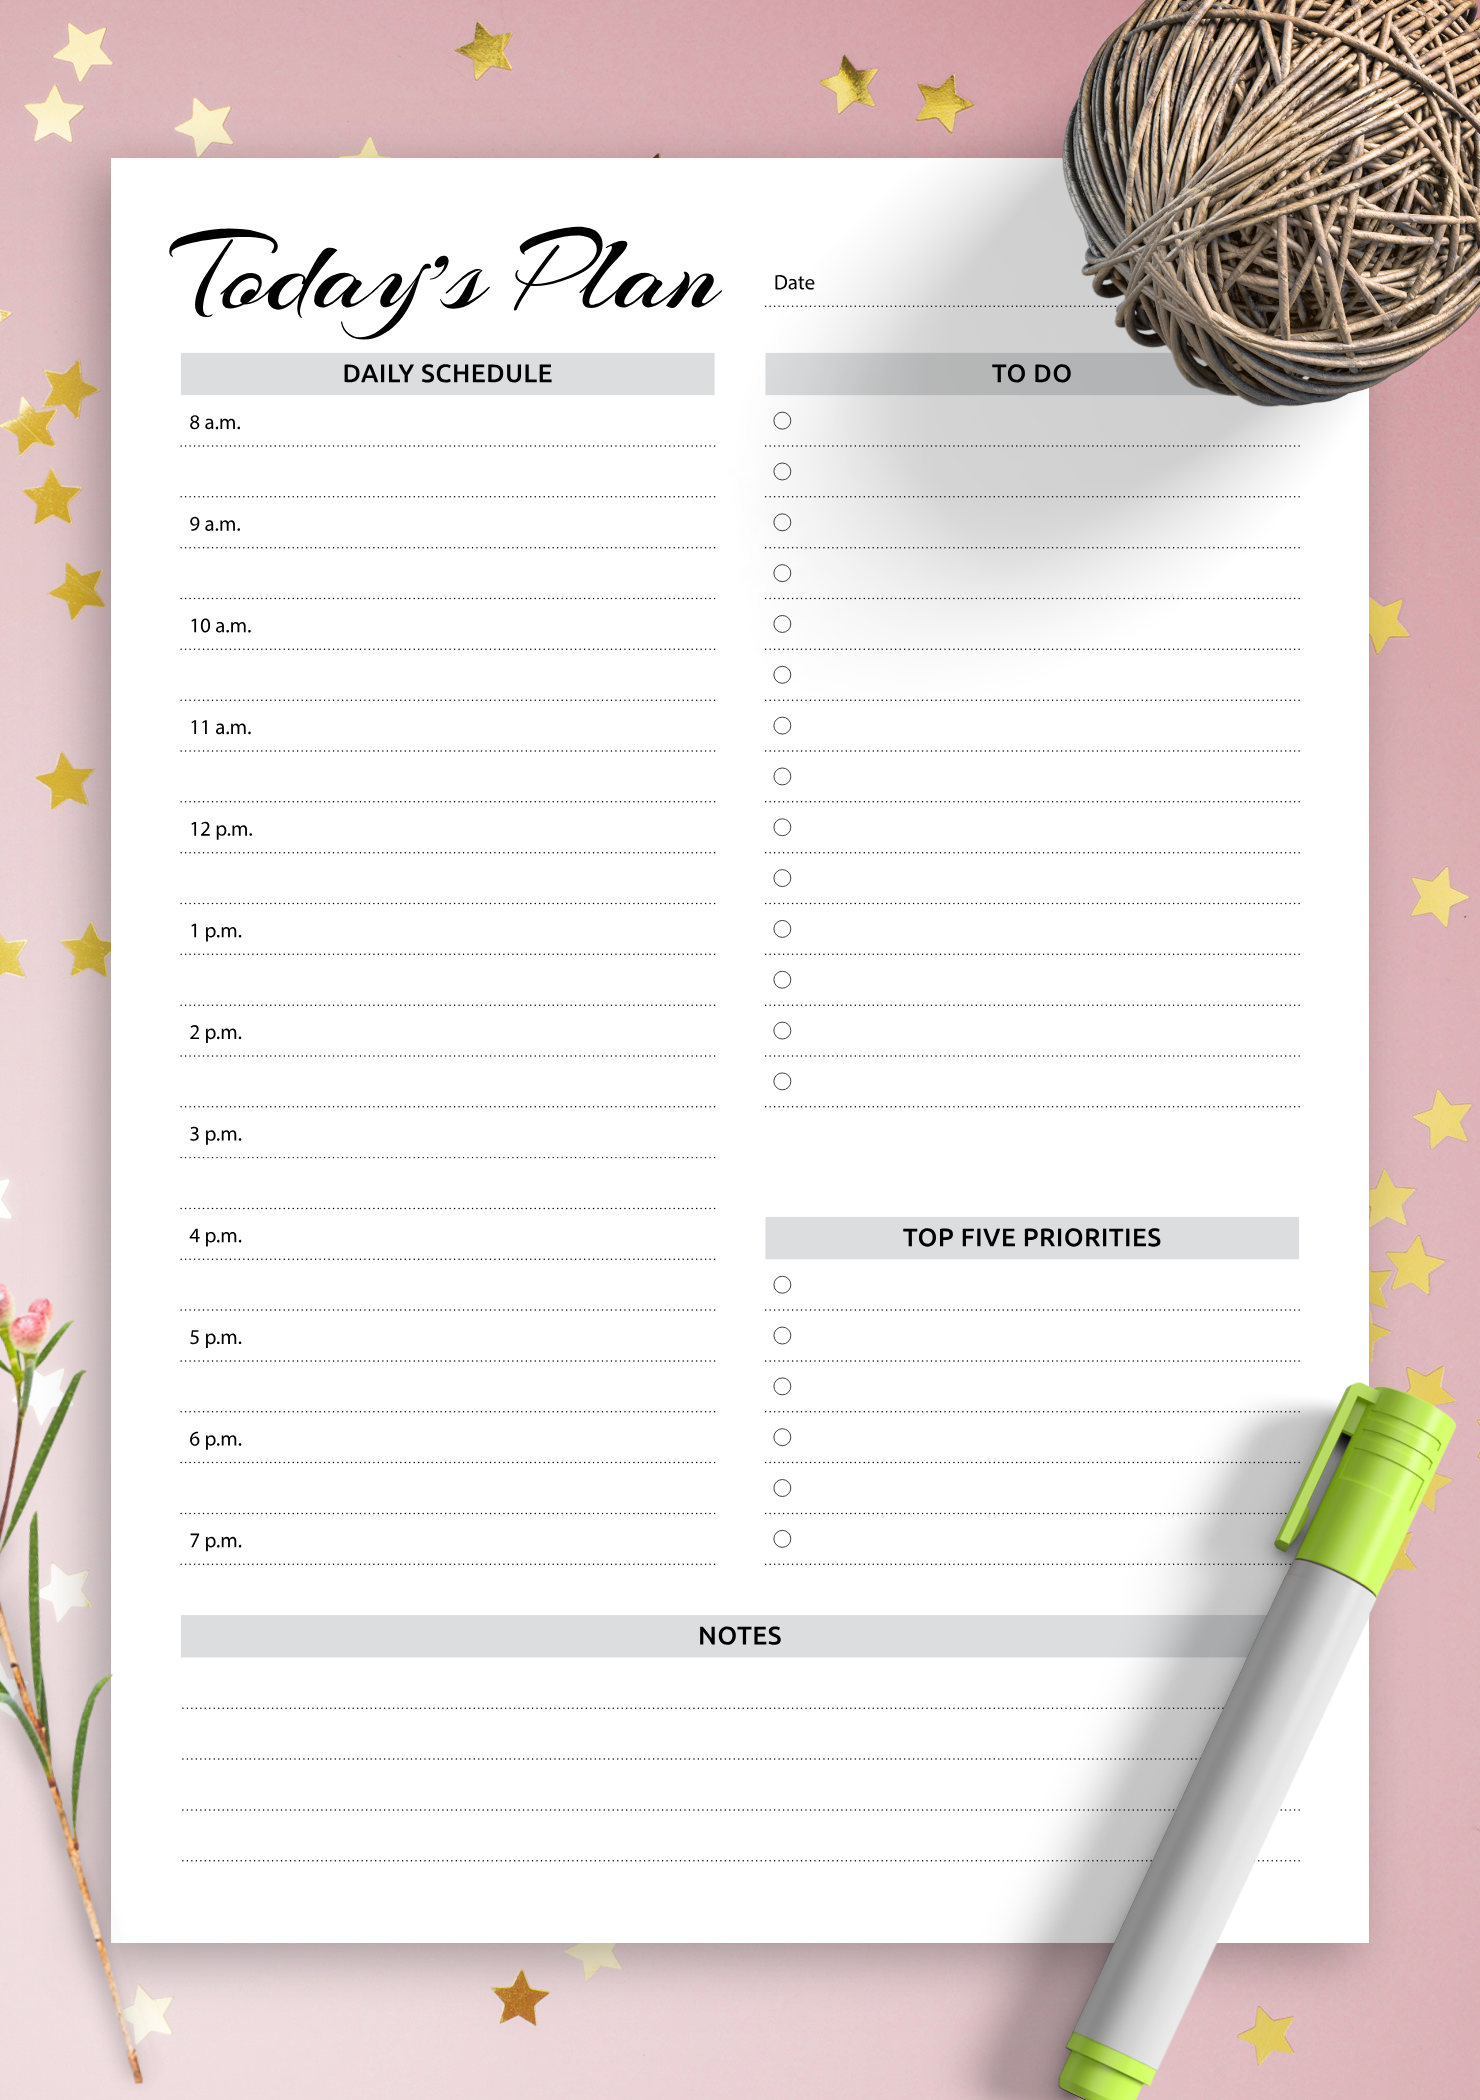 Daily Working Planner Chart Printable Productivity Planner Work Day Organizer To-Do List Digital Download List Hourly Planning Chart